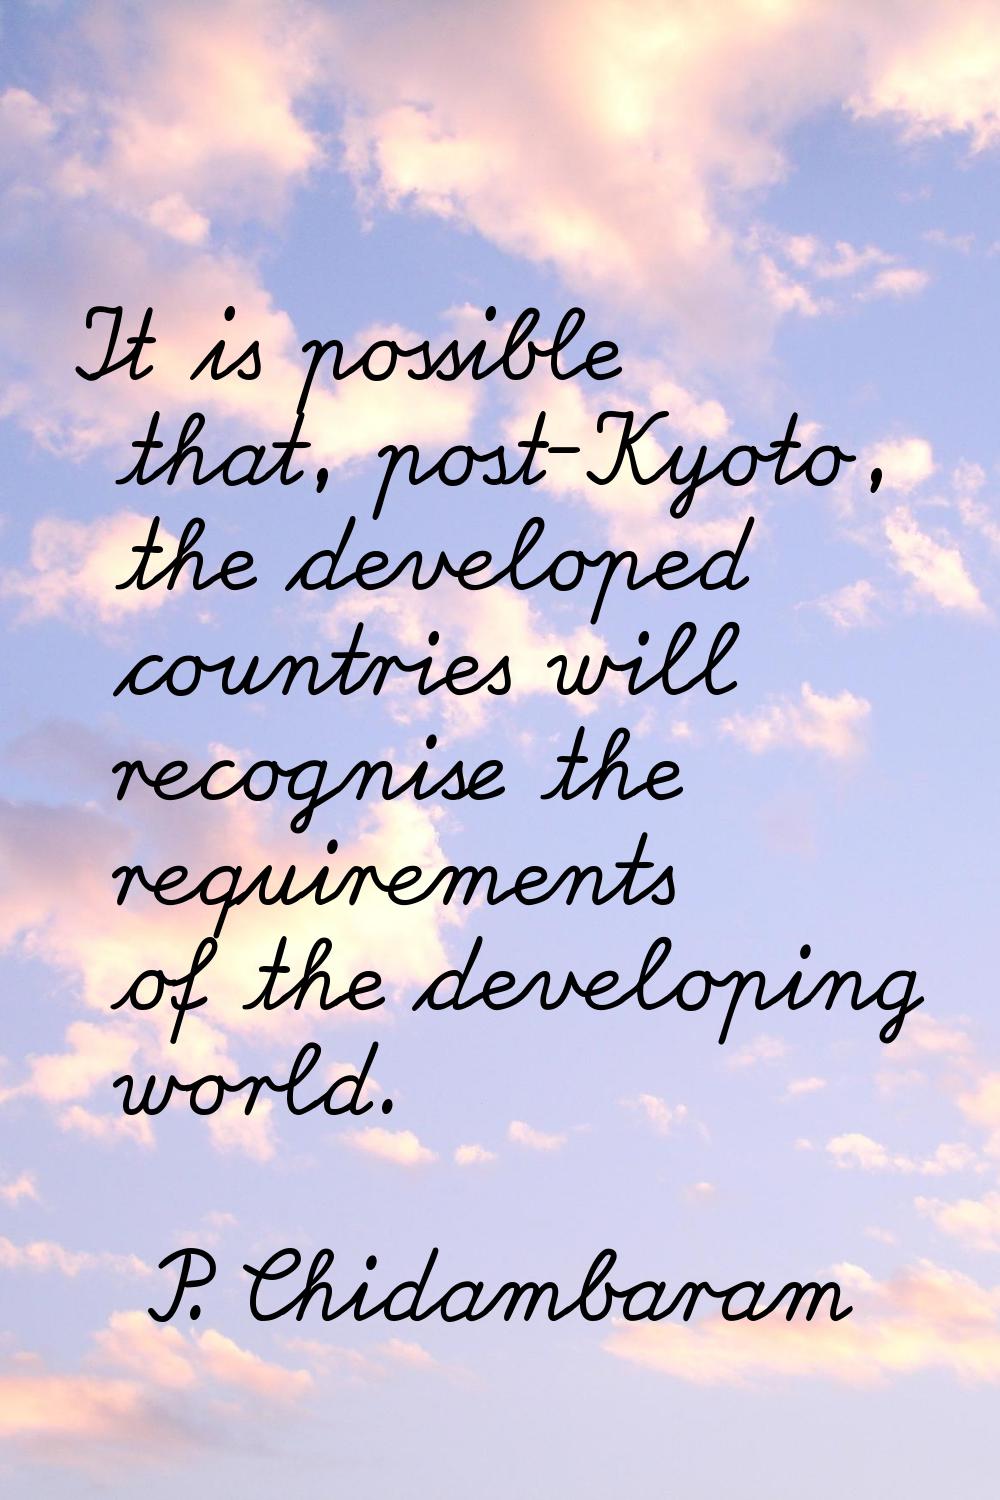 It is possible that, post-Kyoto, the developed countries will recognise the requirements of the dev